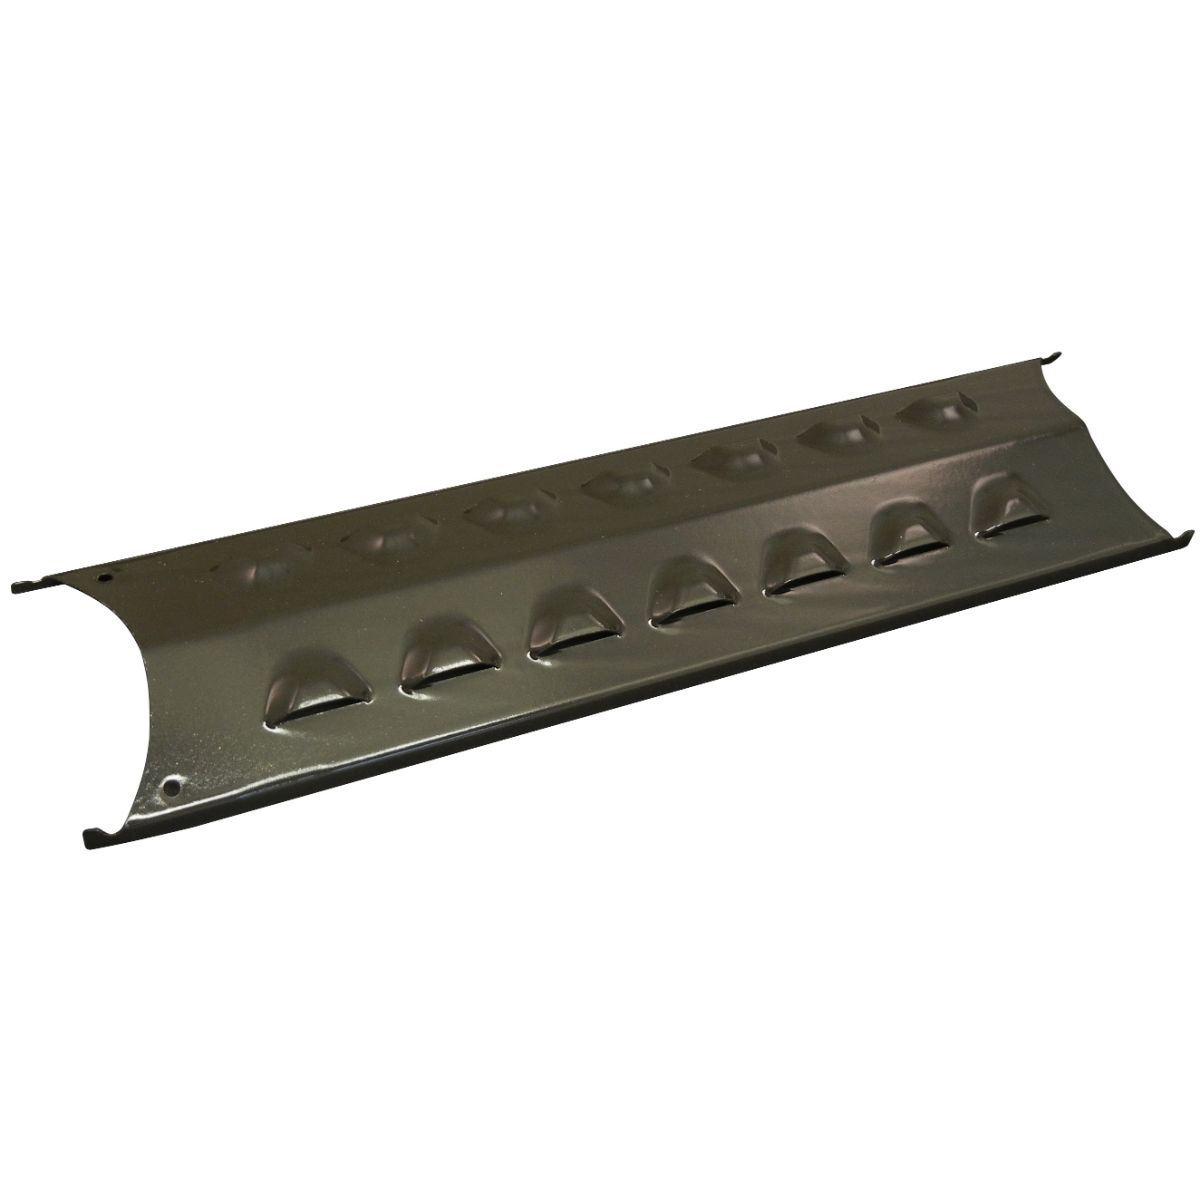 Porcelain steel heat plate for BBQ Tek, Perfect Flame, Presidents Choice brand gas grills